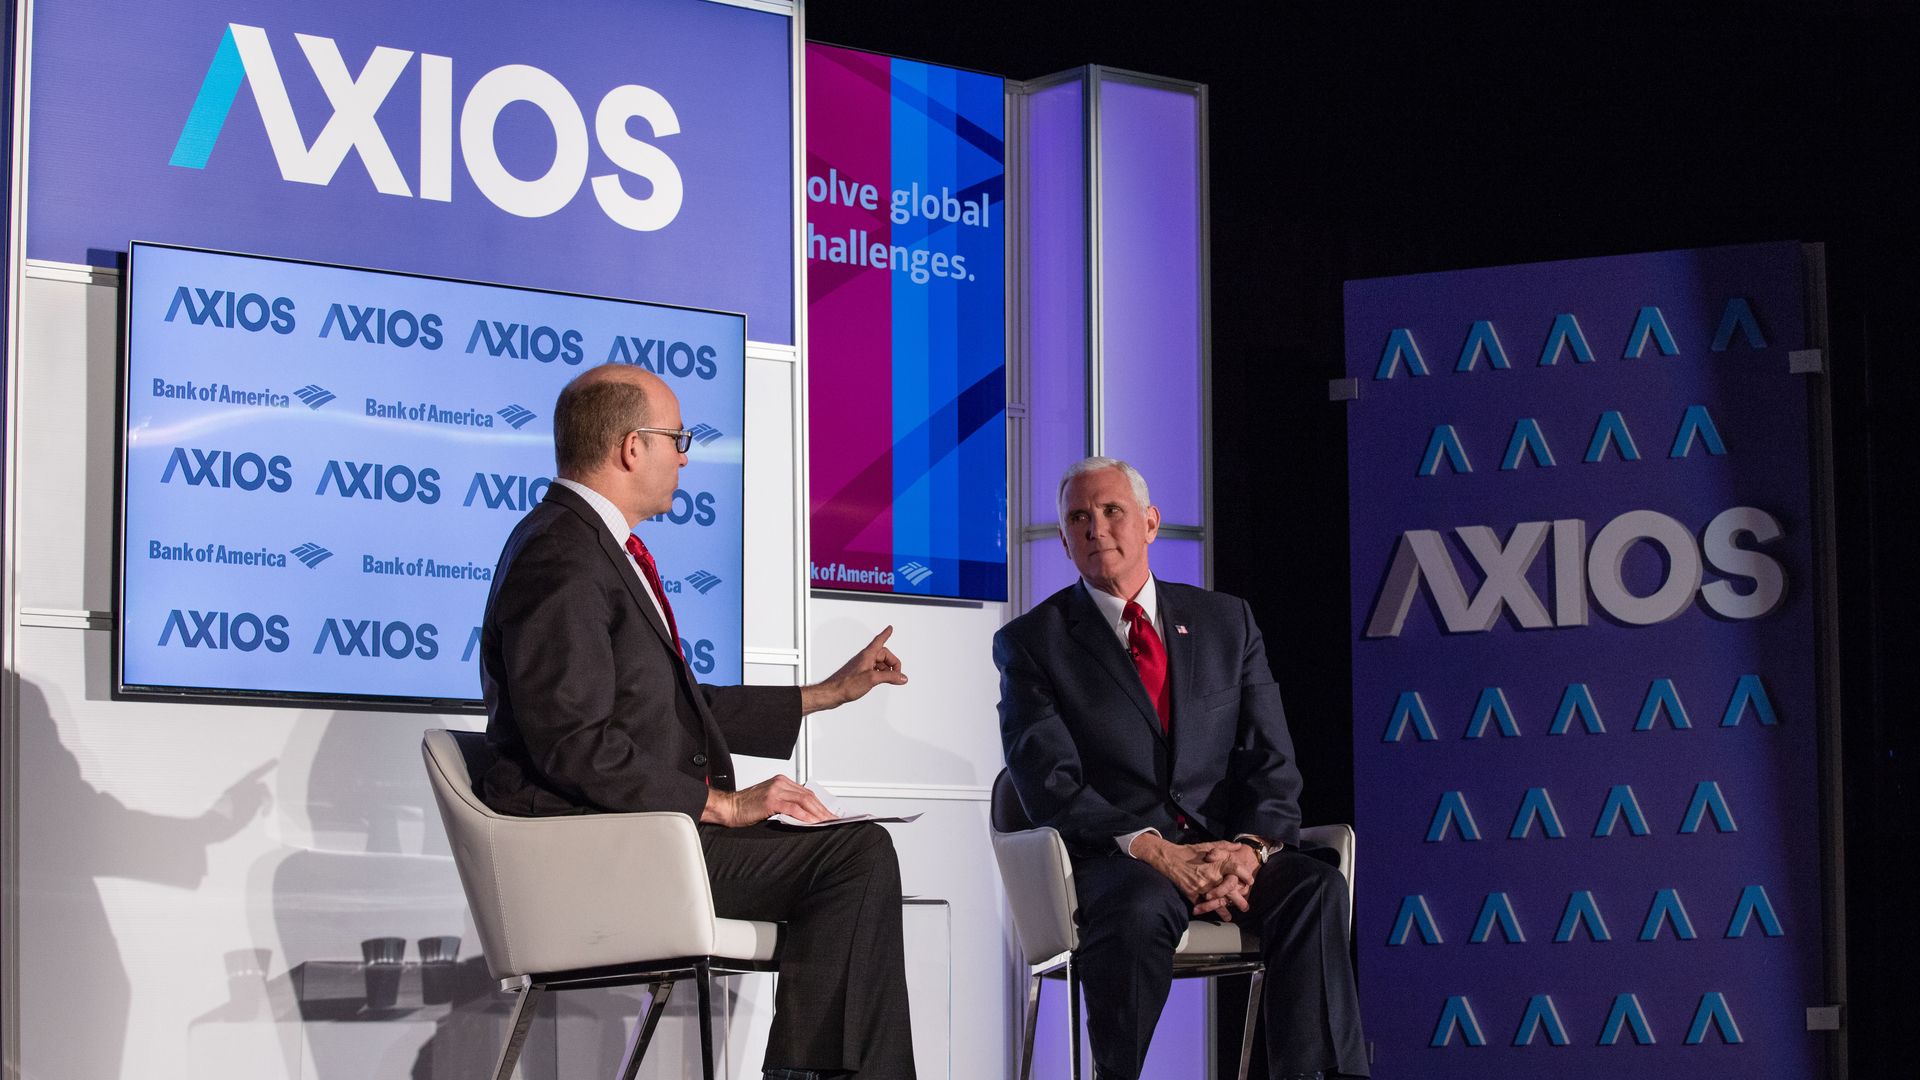 Mike Allen interviewing Mike Pence on the Axios stage.